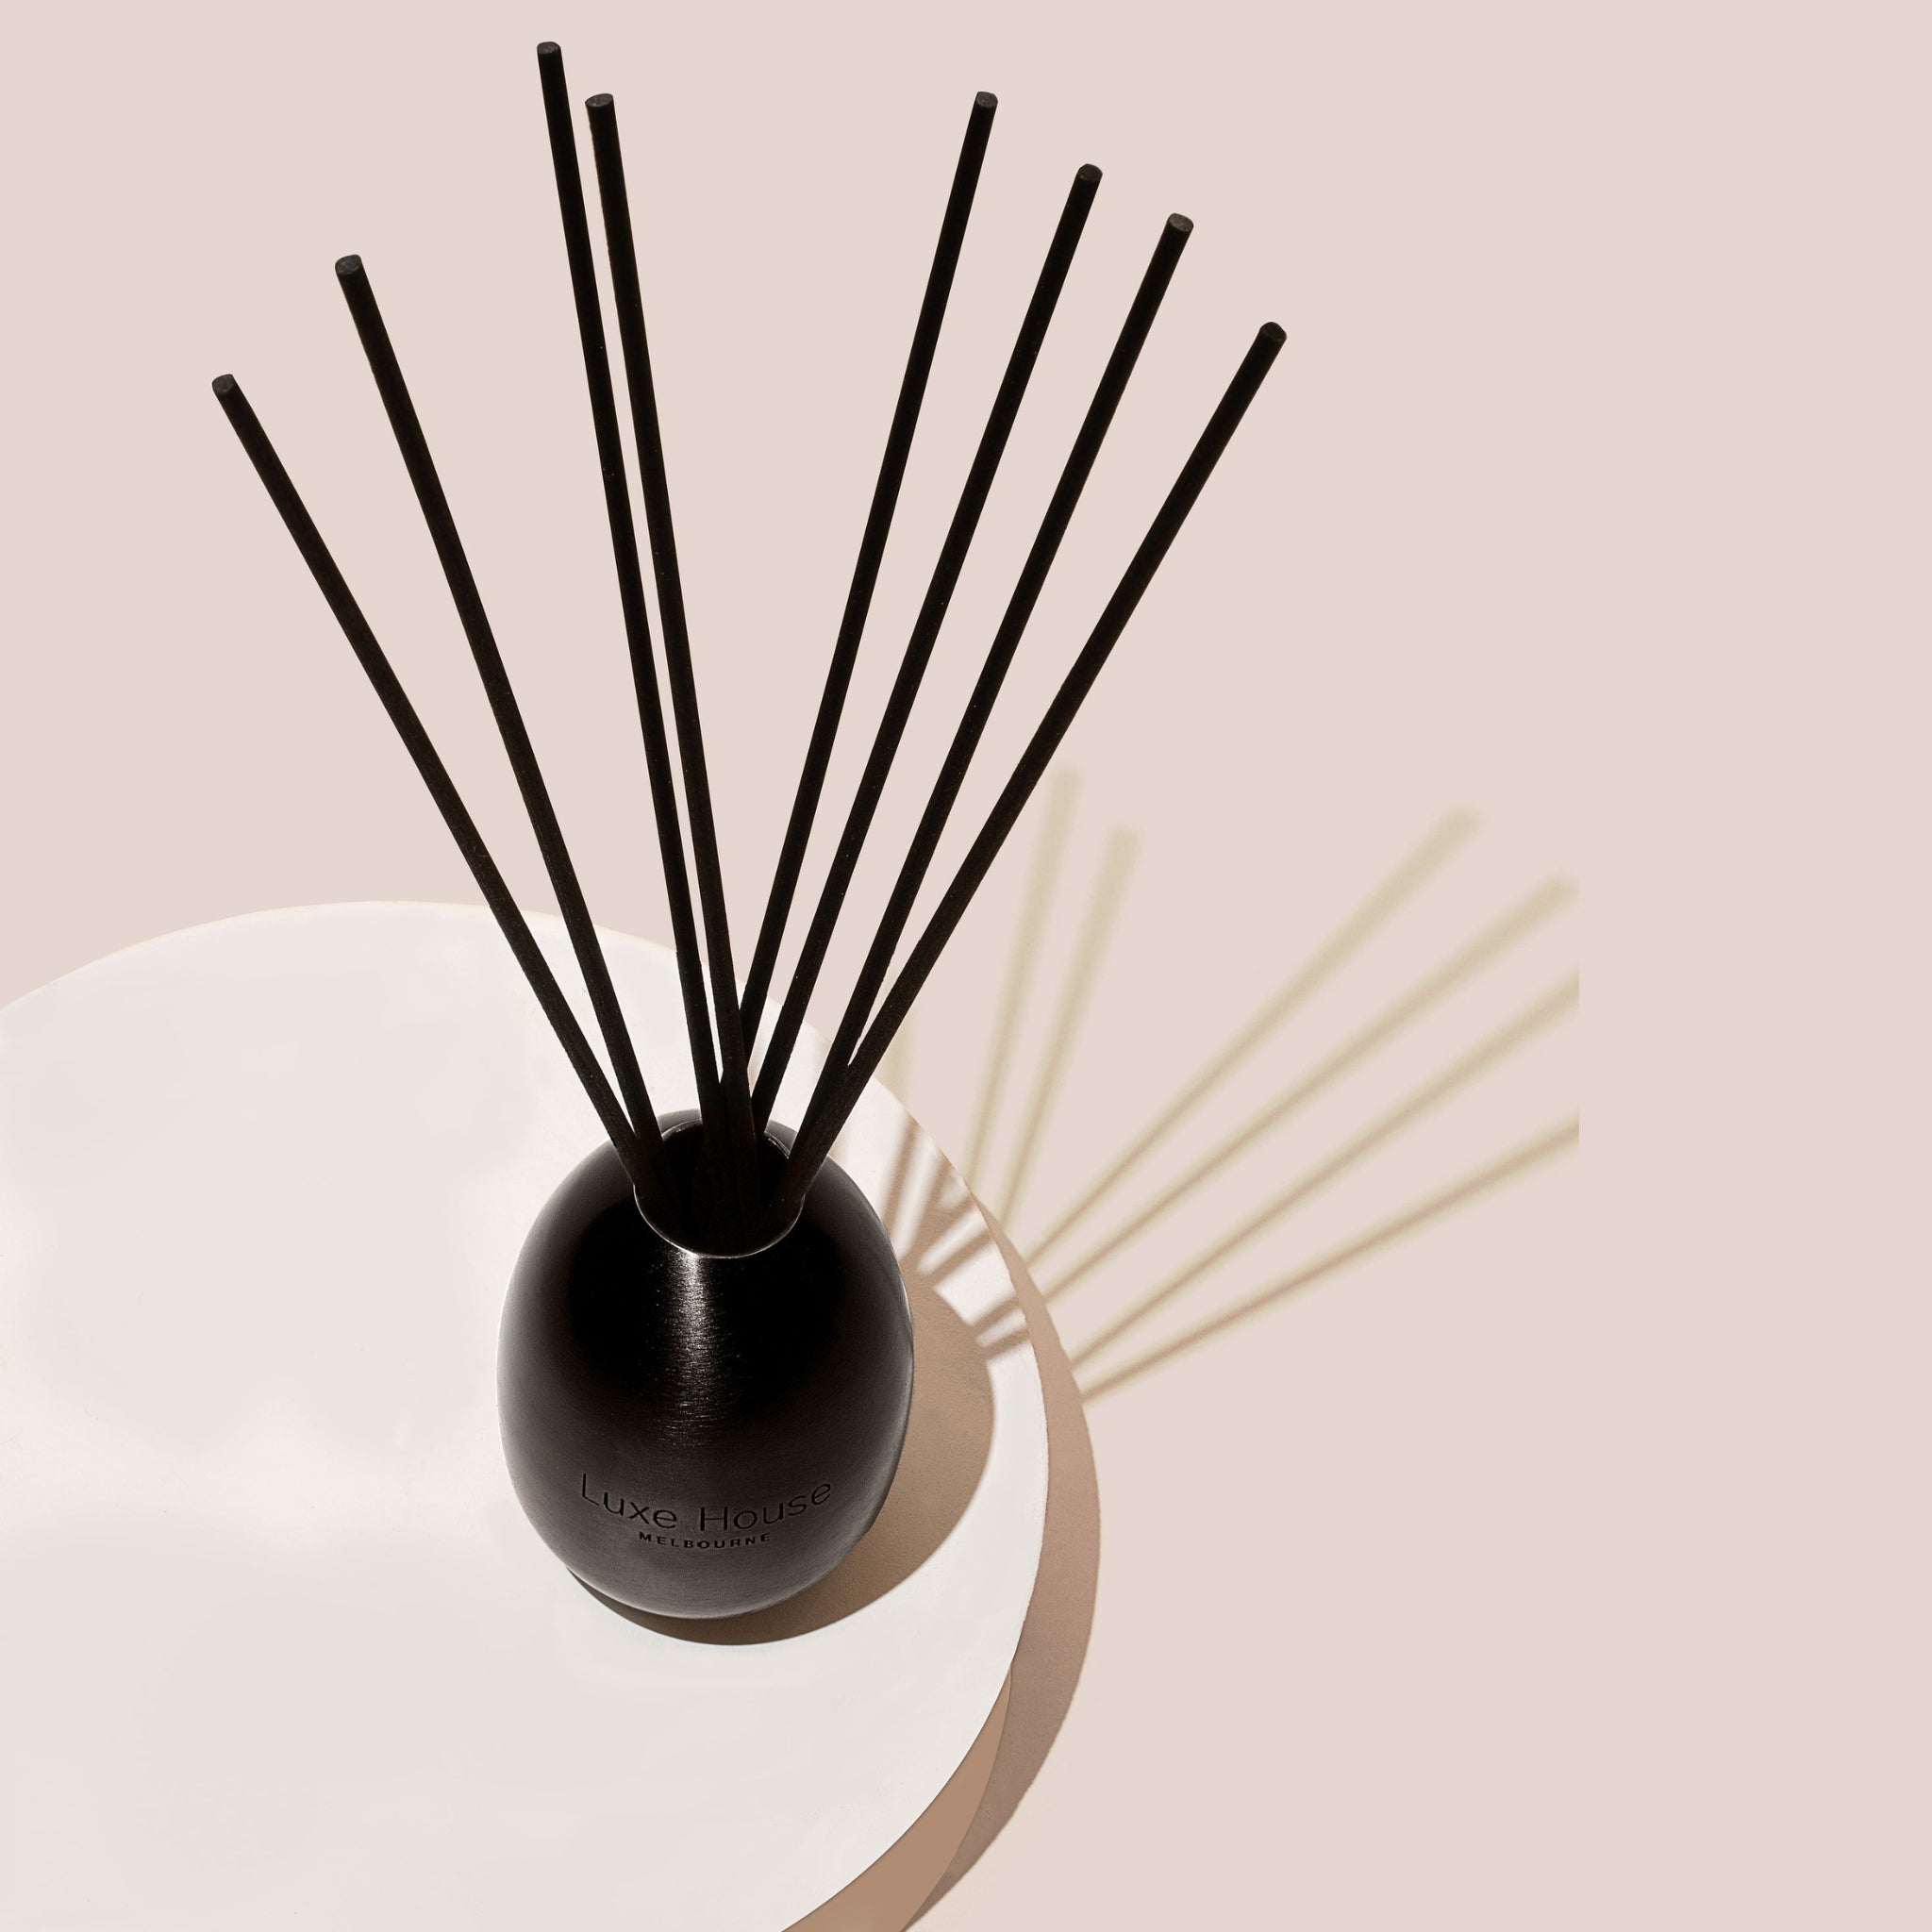 Mojave Rose Luxury Reed Diffuser